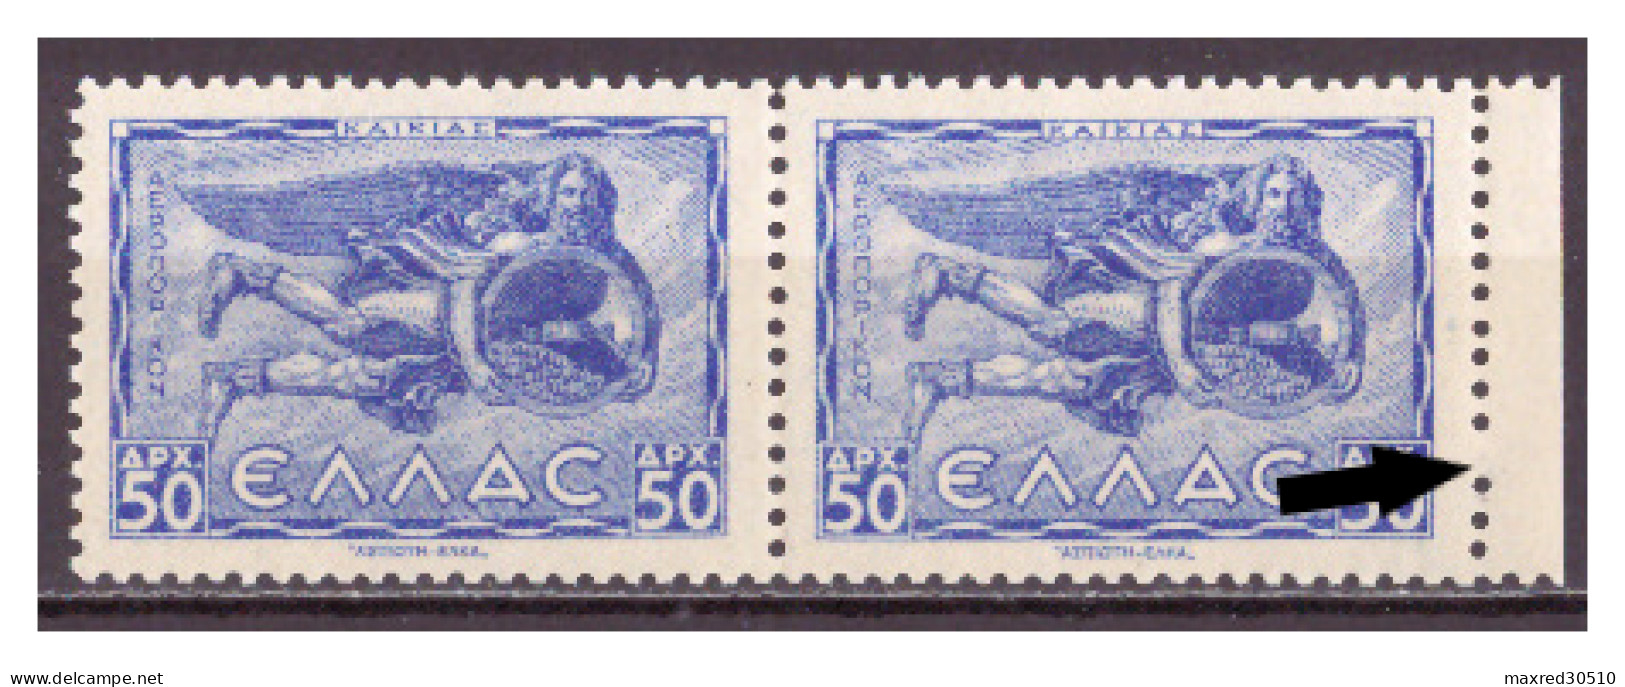 GREECE 1943 AIRPOST ISSUE HORIZONTAL PAIR 50DR. OF "WINDS II" WITH PRINTING ERROR AT THE RIGHT PERFORATION SEE DESCRIBE - Variétés Et Curiosités